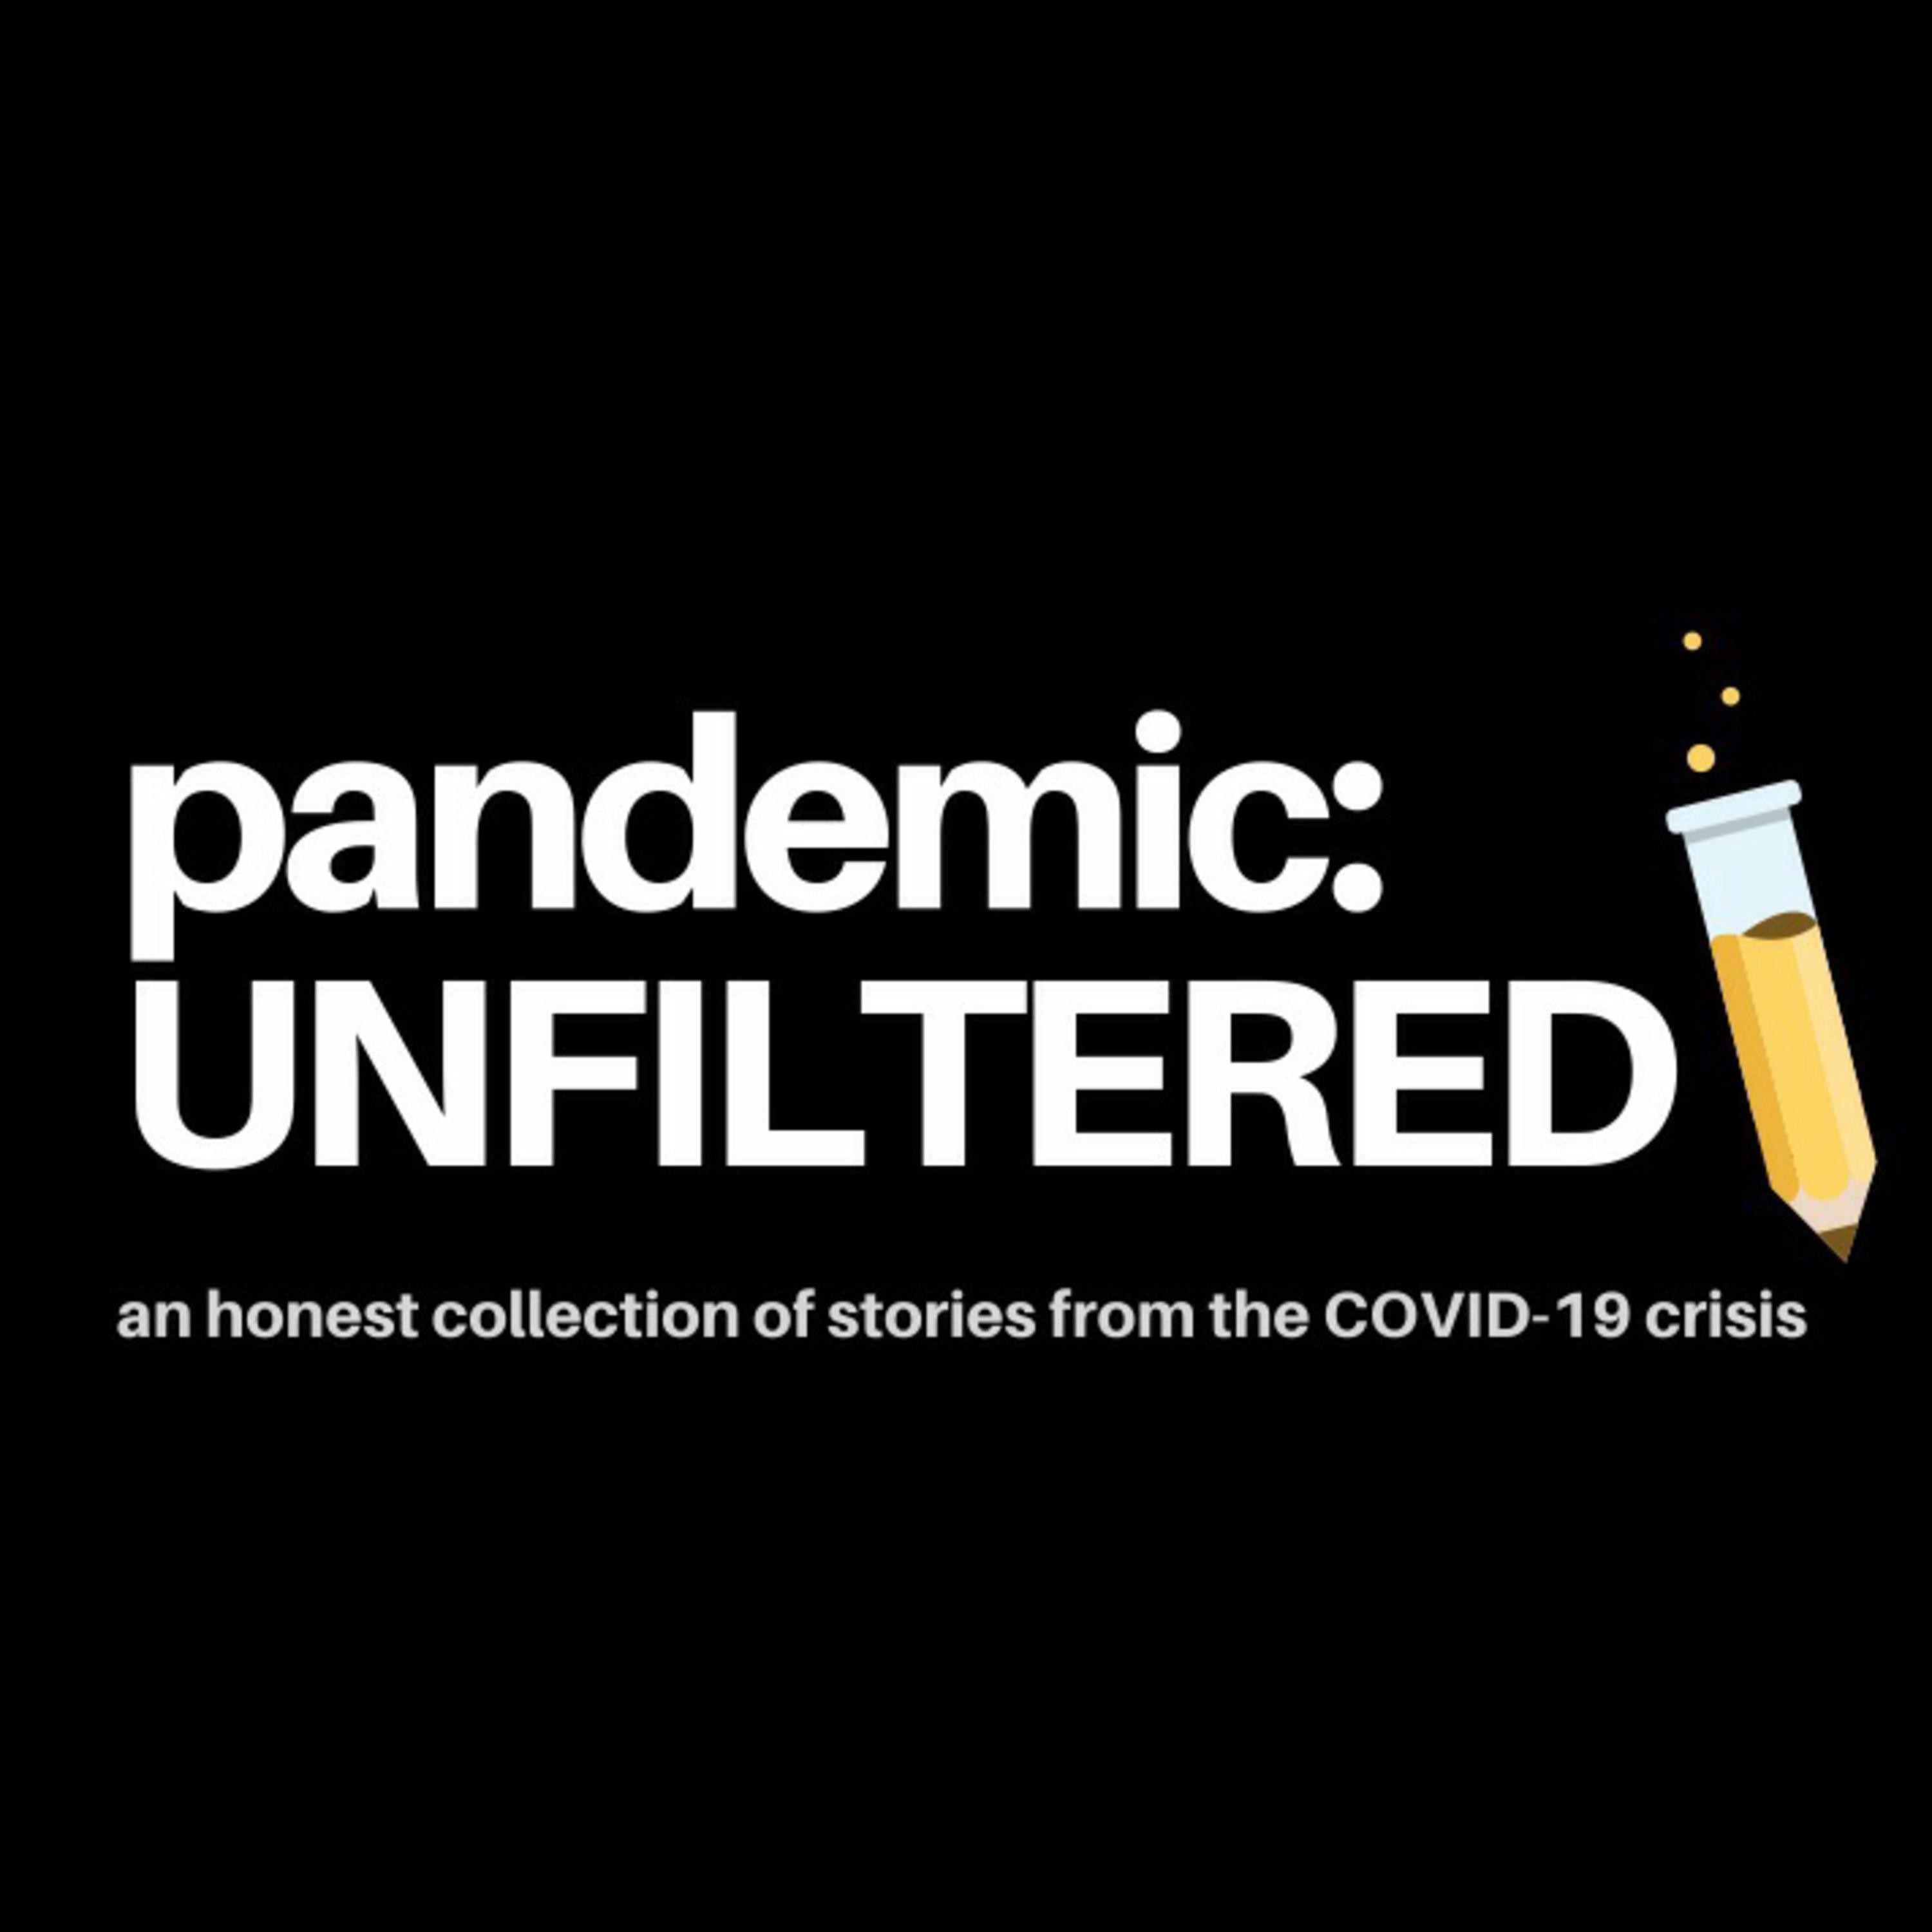 pandemic: UNFILTERED